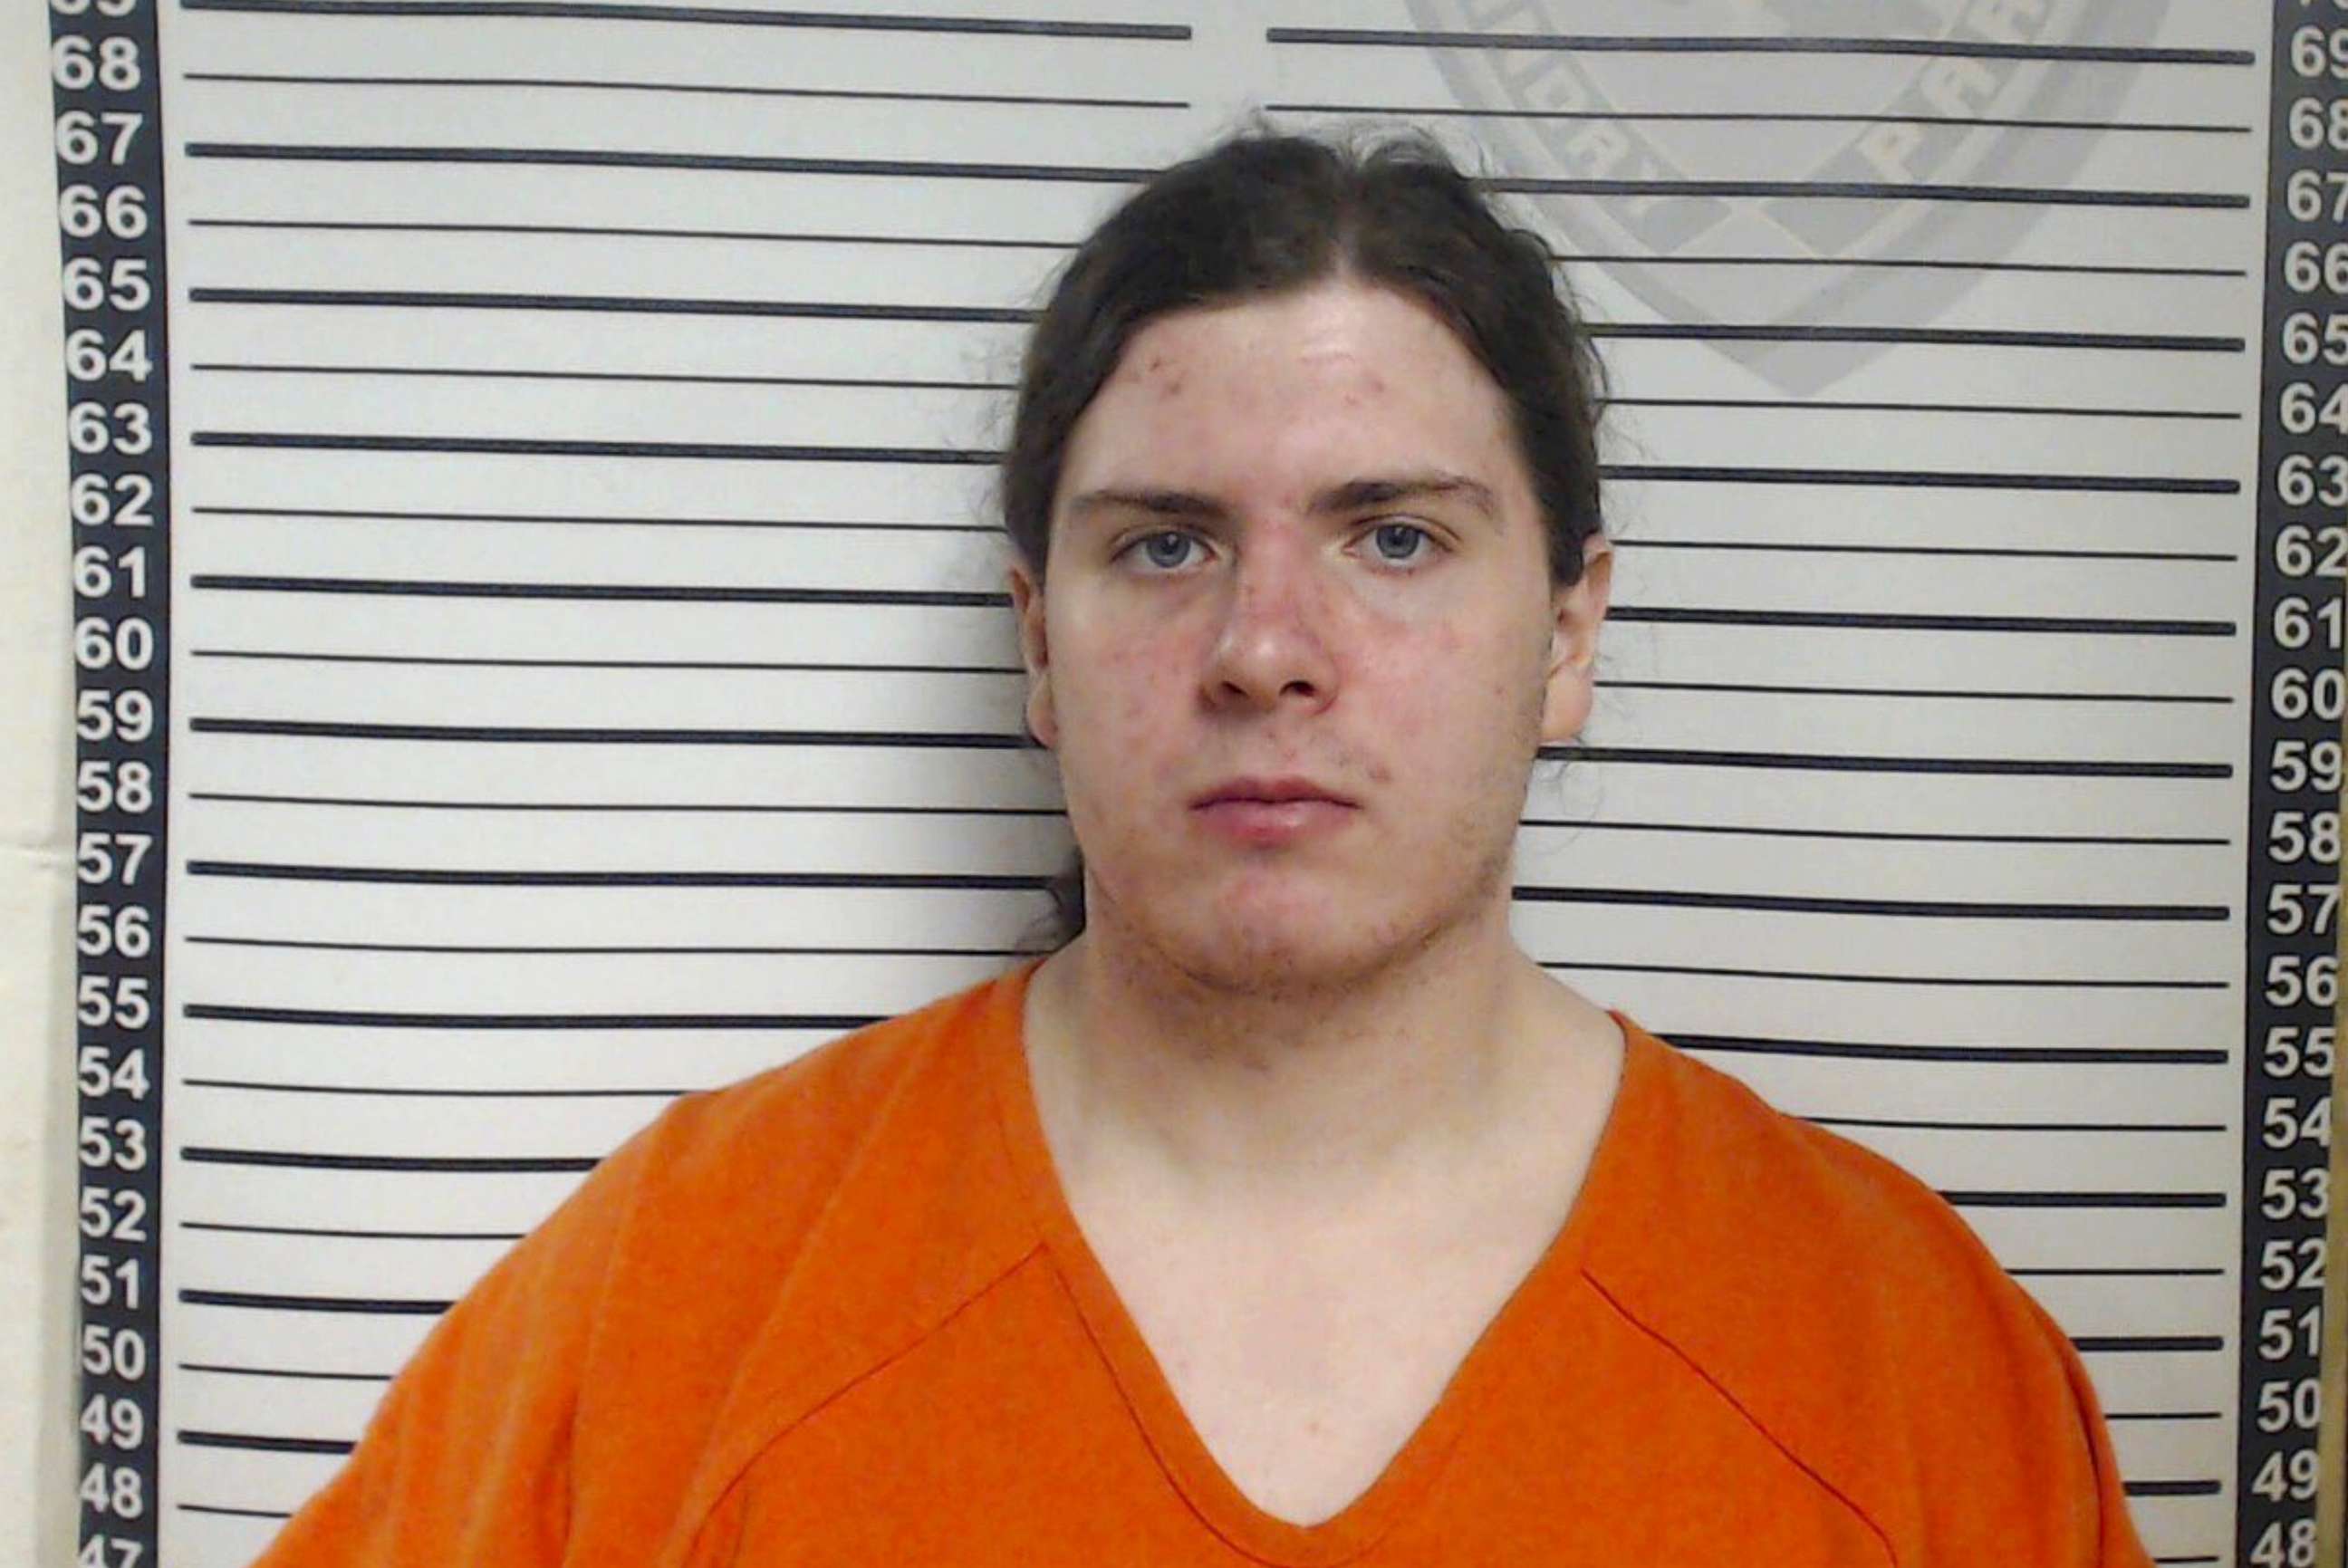 PHOTO: Holden Matthews, who was arrested, April 10, 2019, in connection with suspicious fires at three historic black churches in southern Louisiana.